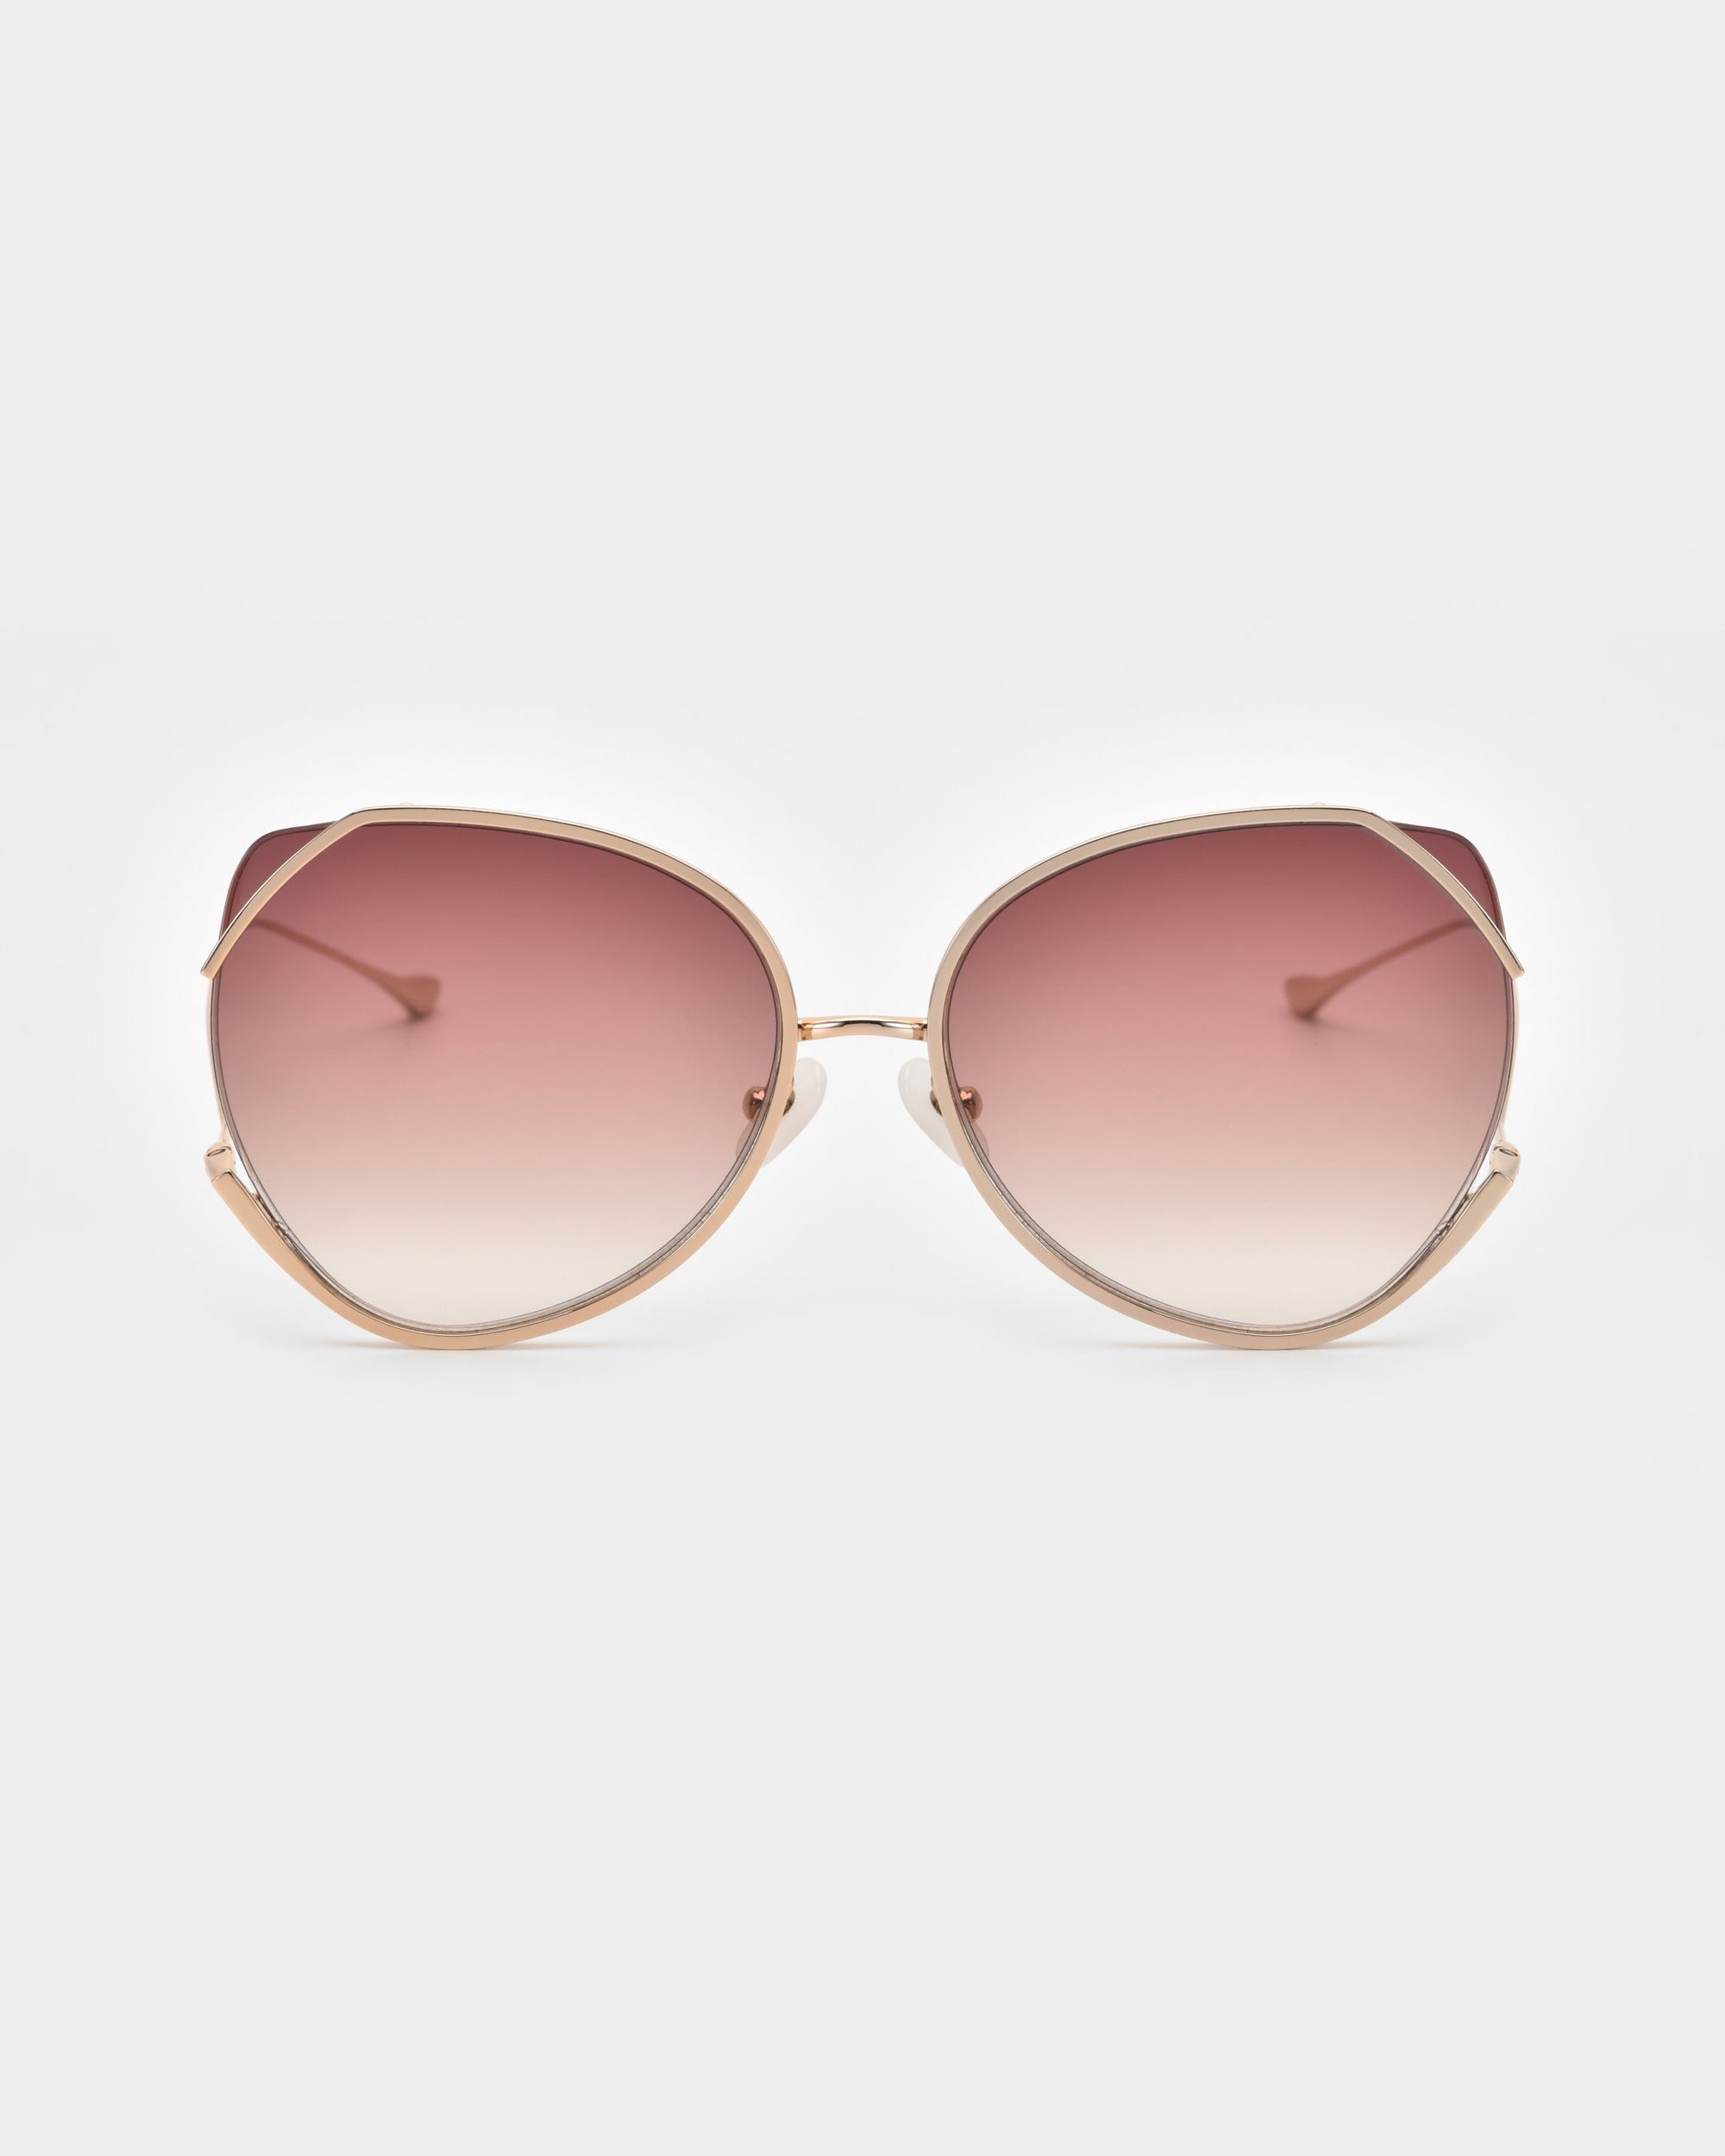 A pair of Wonderland by For Art's Sake® stylish sunglasses with large, round lenses that transition from pink at the top to clear at the bottom. Featuring jadestone nose pads for comfort and UV protection, these sunglasses have a thin, gold metal frame and slightly curved temples, all set against a plain white background.